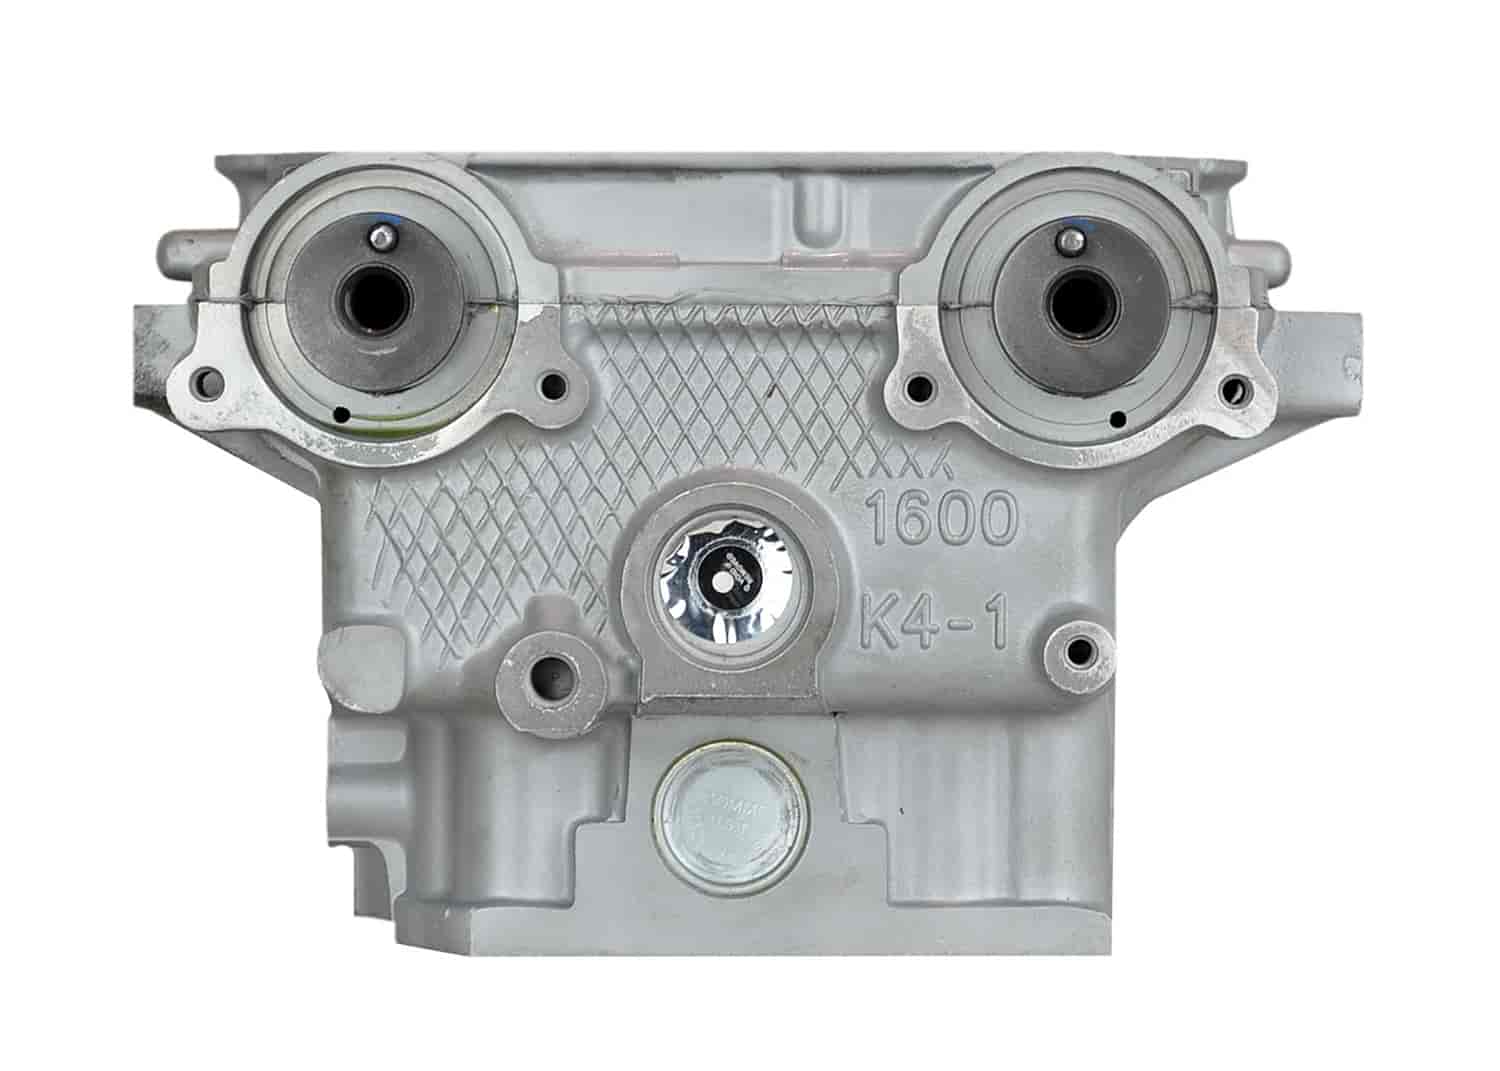 Remanufactured Cylinder Head for 2003-2005 Kia Rio with 1.6L L4